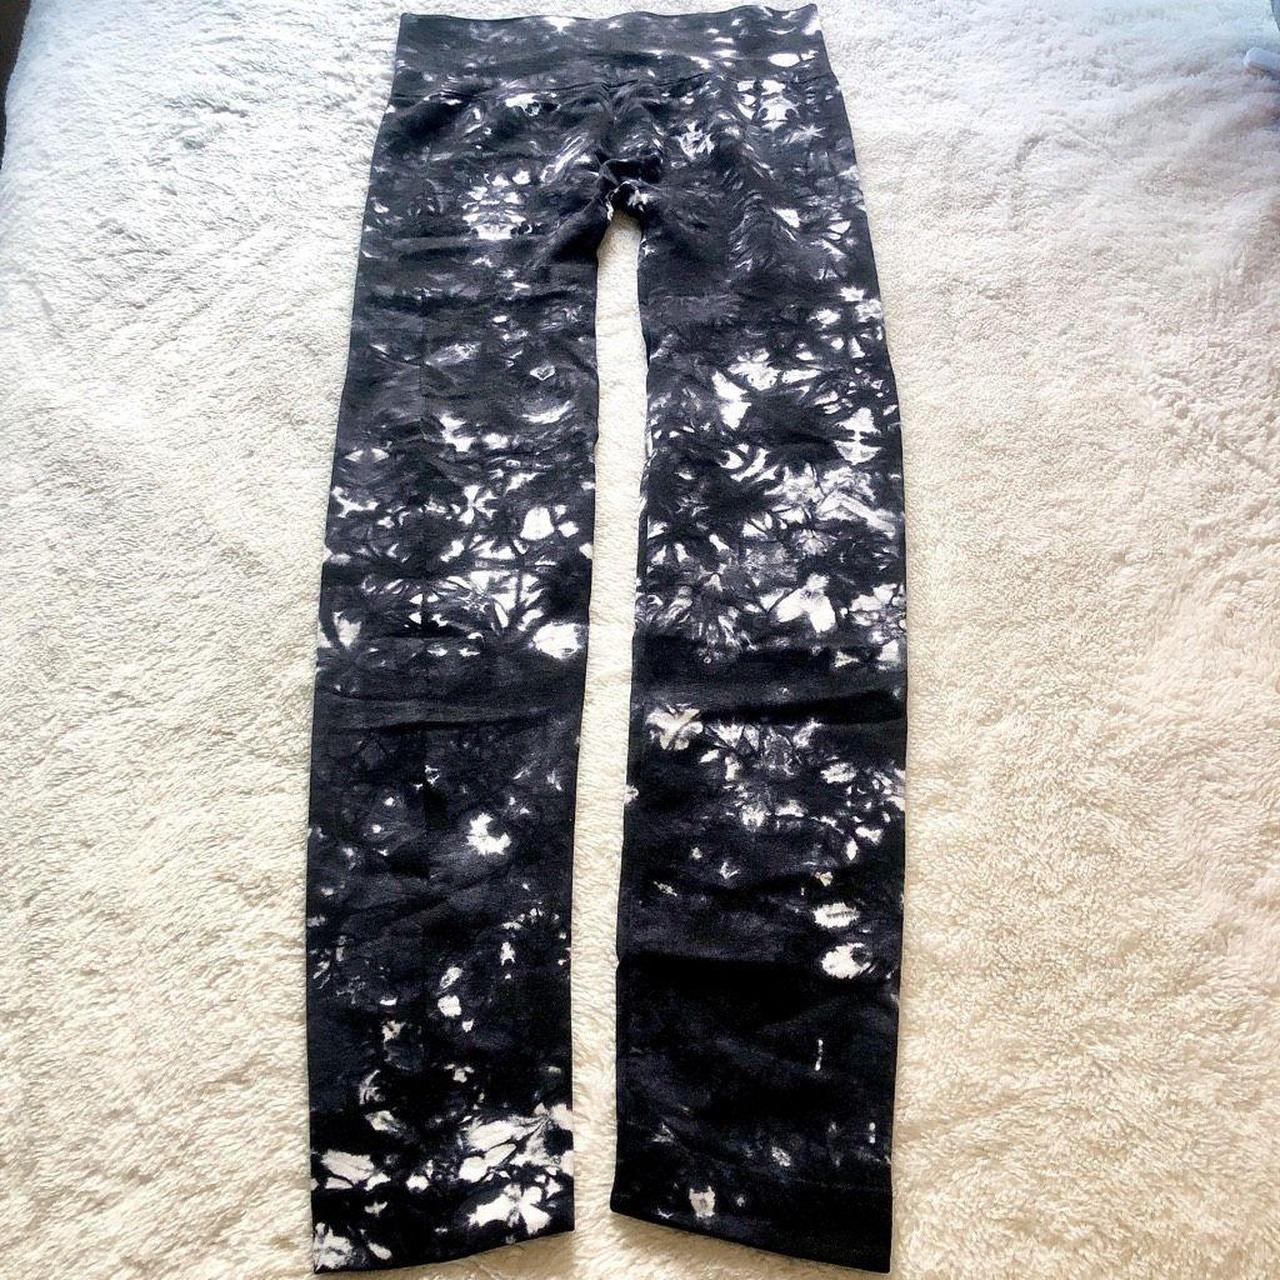 XHILARATION LEGGINGS BLACK AND WHOTE MARBLE SIZE S/M - Depop